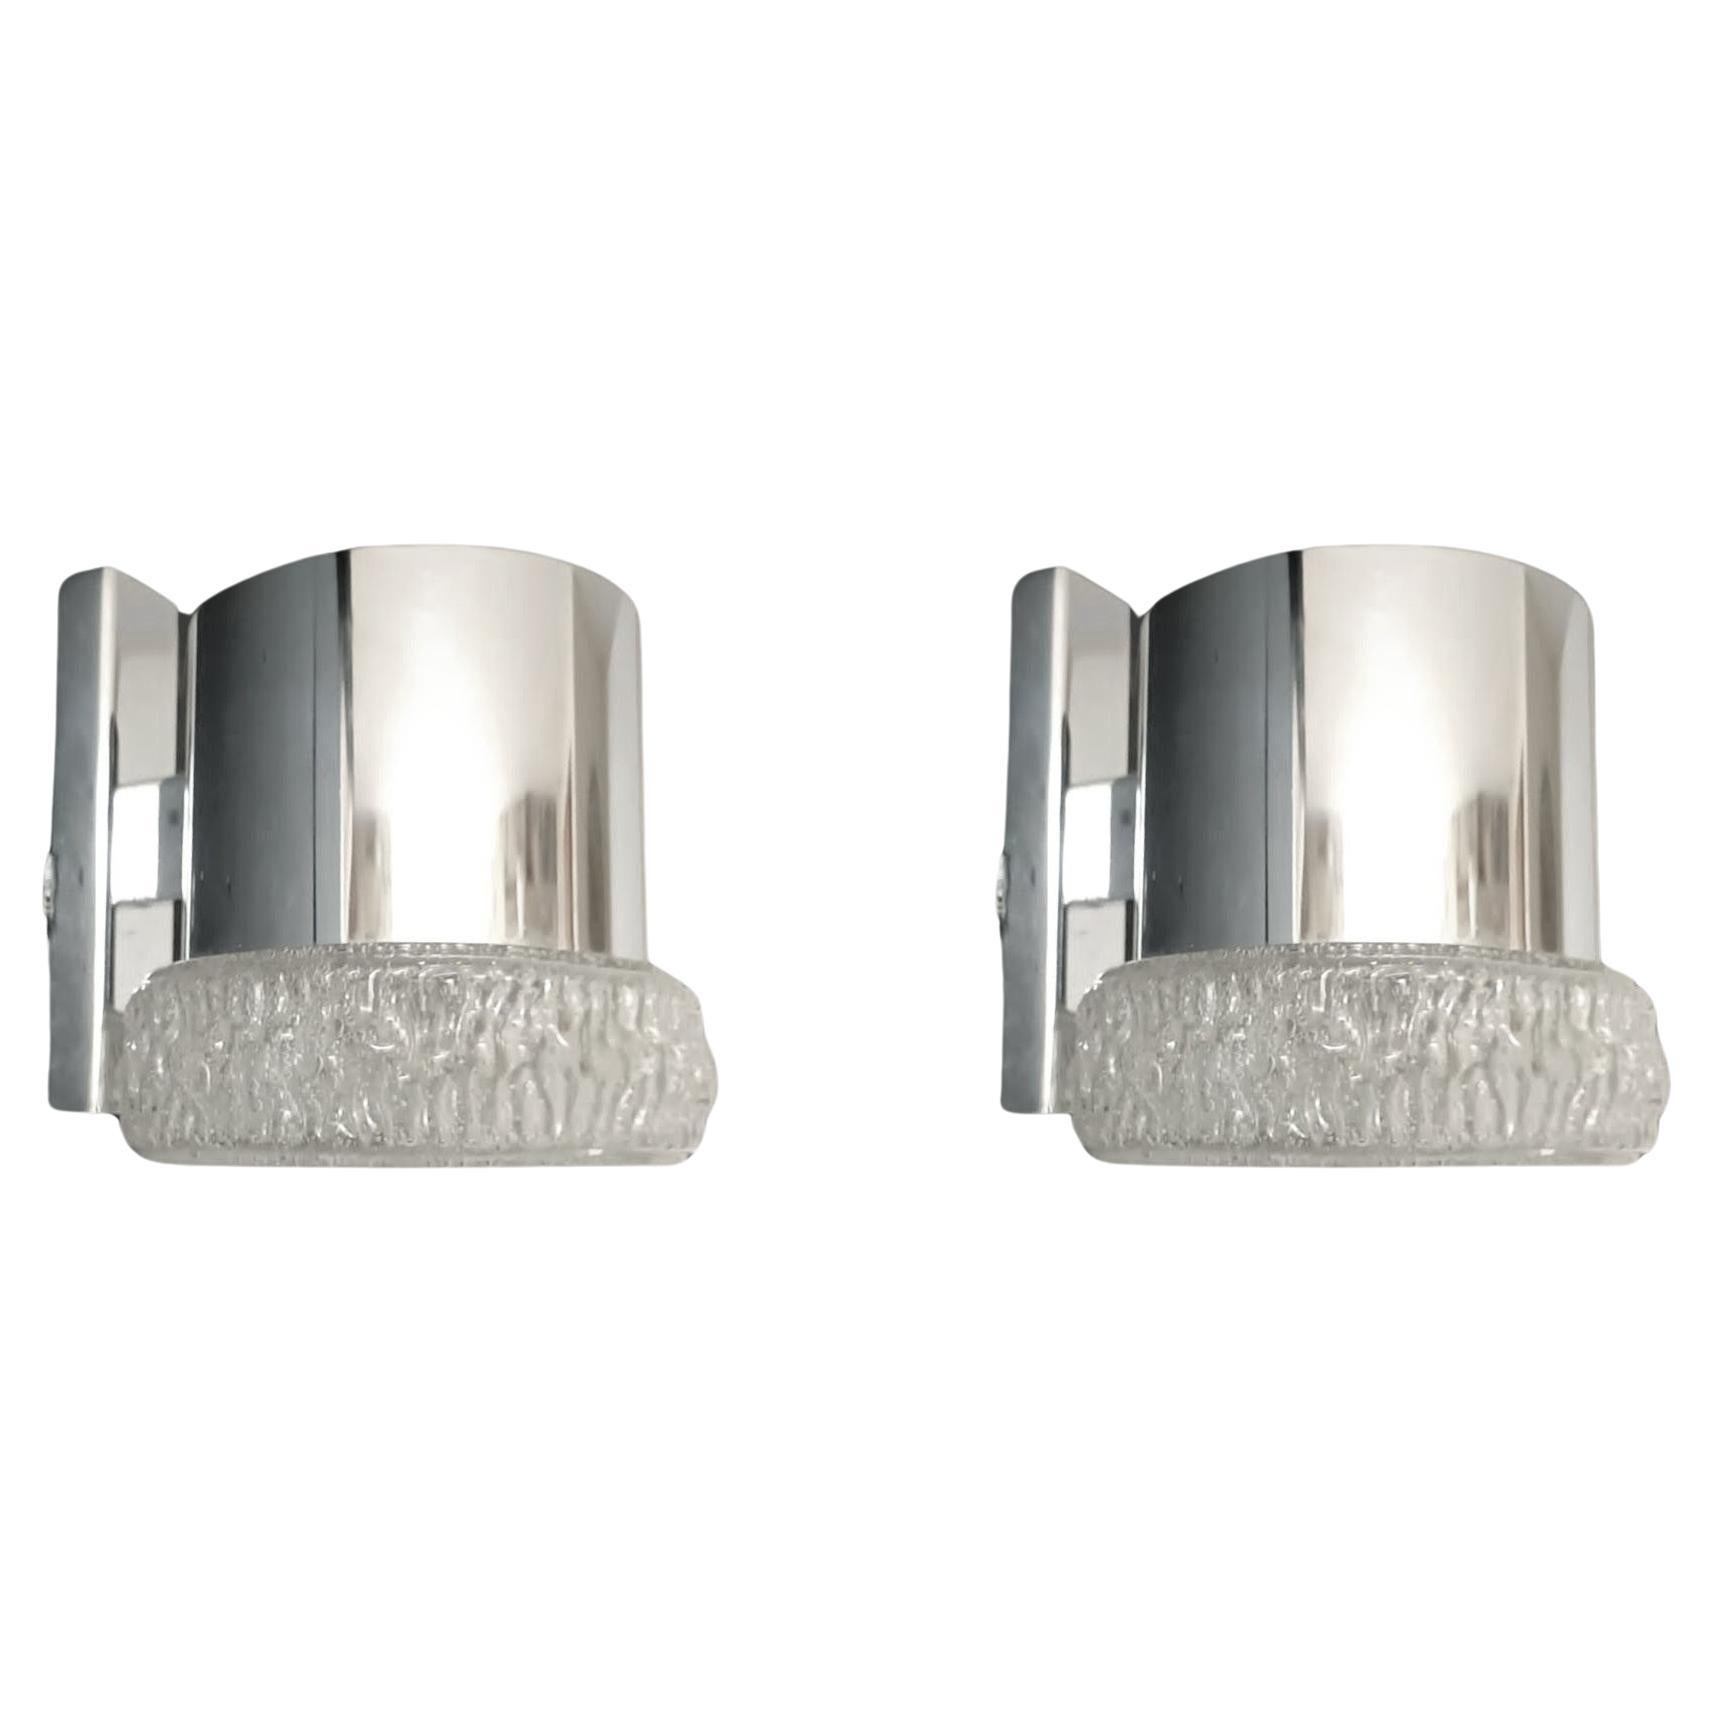 Pair of Chrome Murano Sconces by Gino Sarfatti for Seguso For Sale